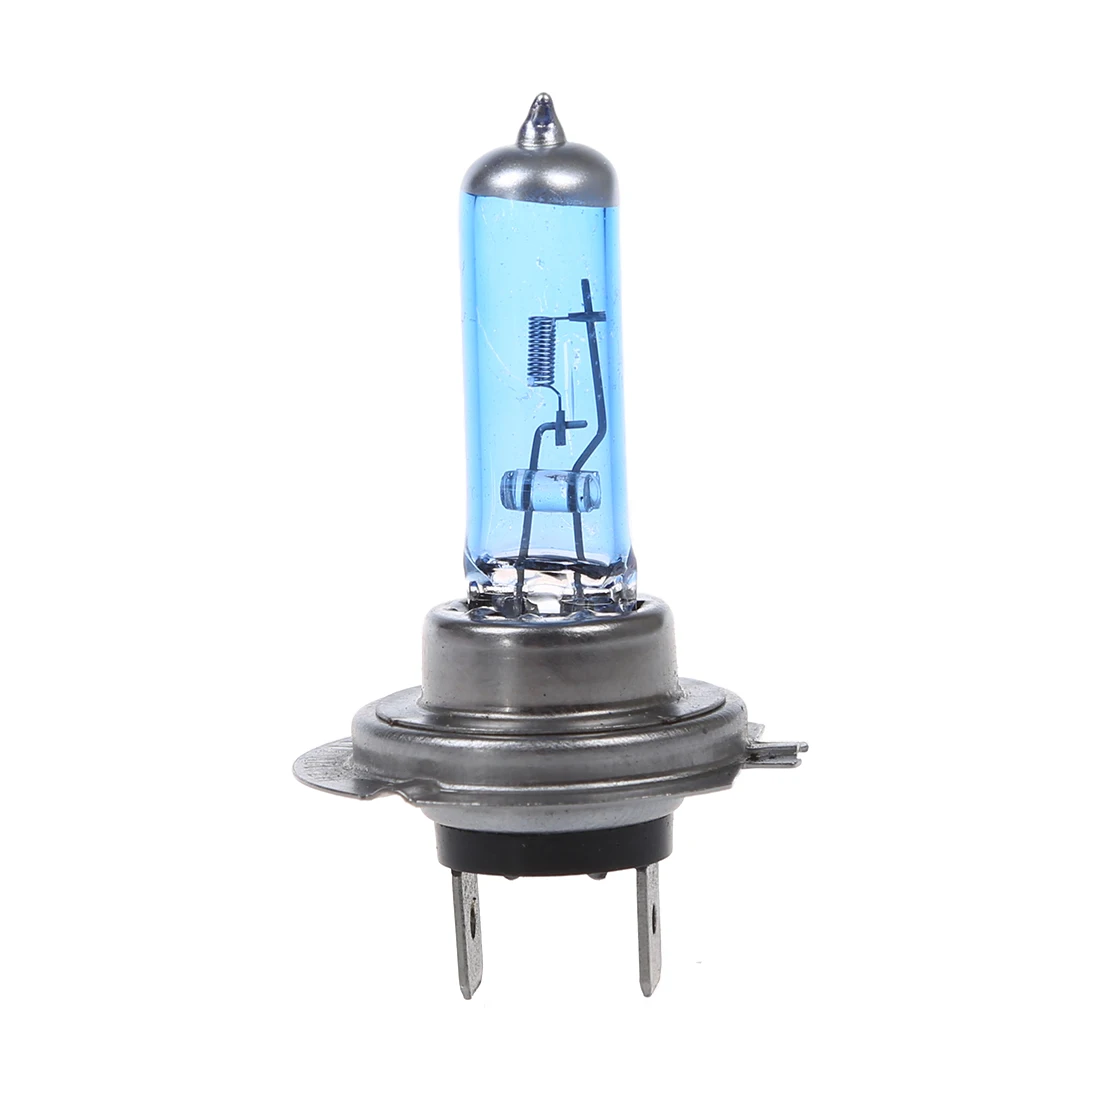 10X H7 AMPOULE LAMPE PHARE BLANC 12V 100W POUR VOITURE V2I9 